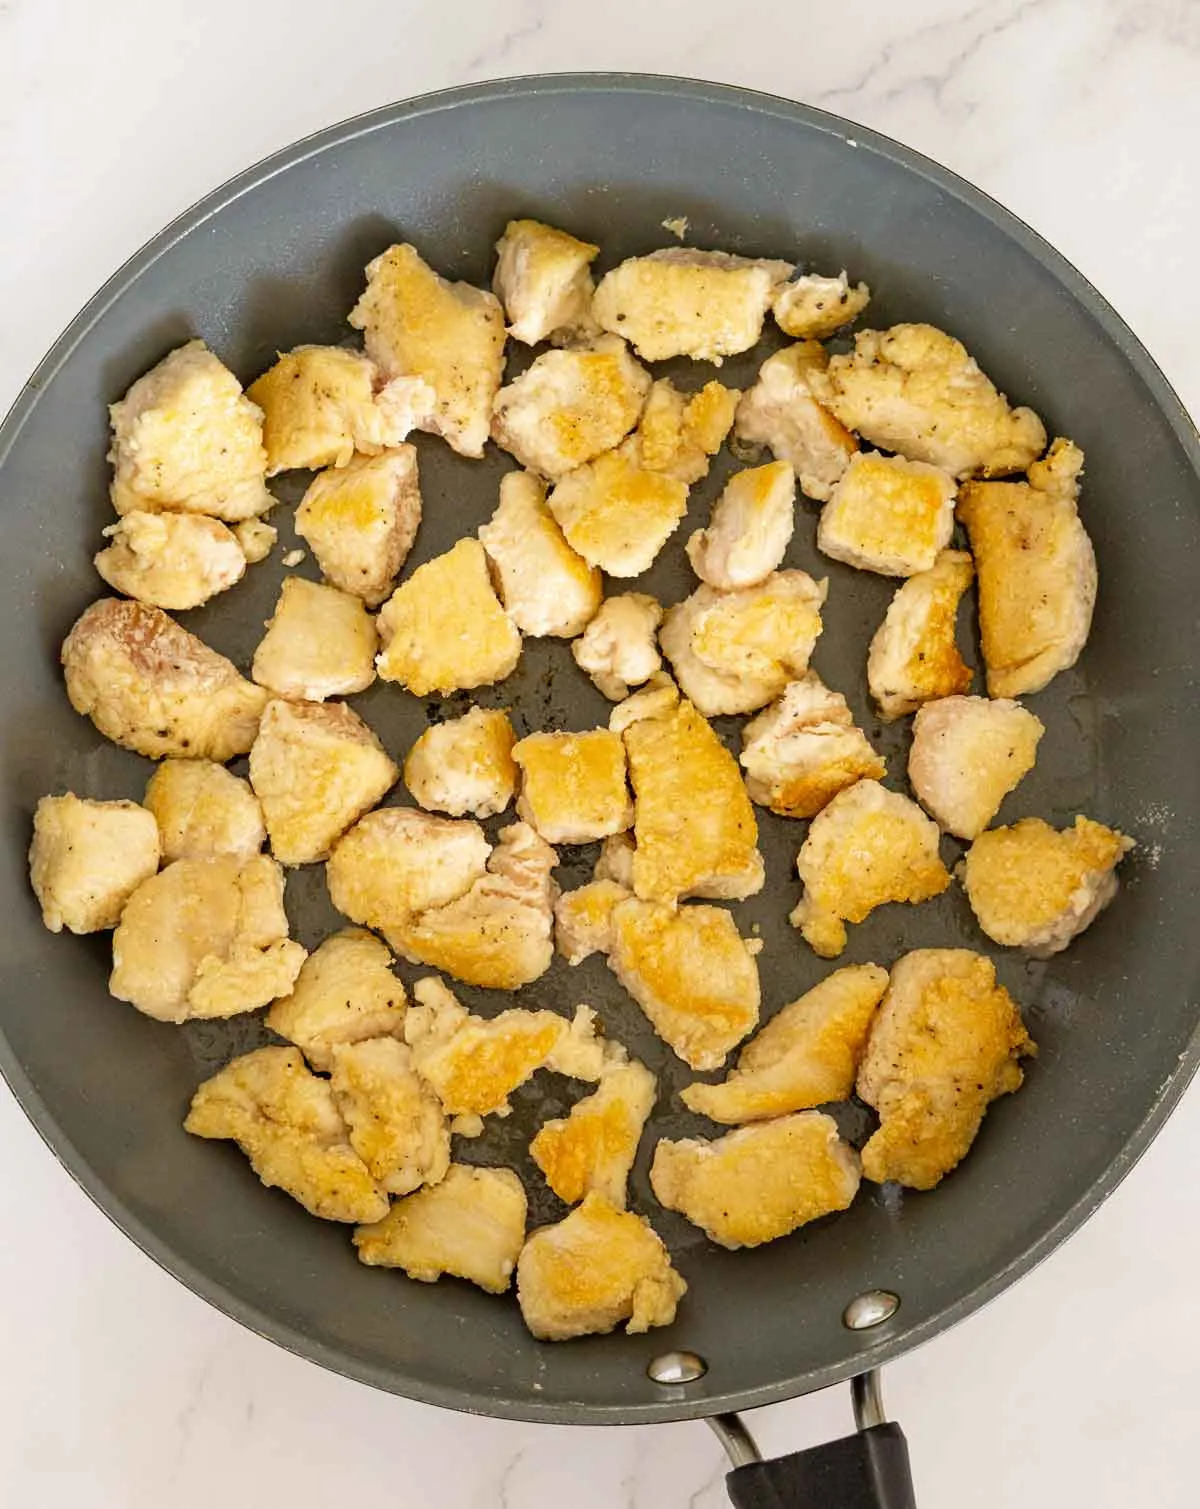 Skillet with cooked cubed chicken.